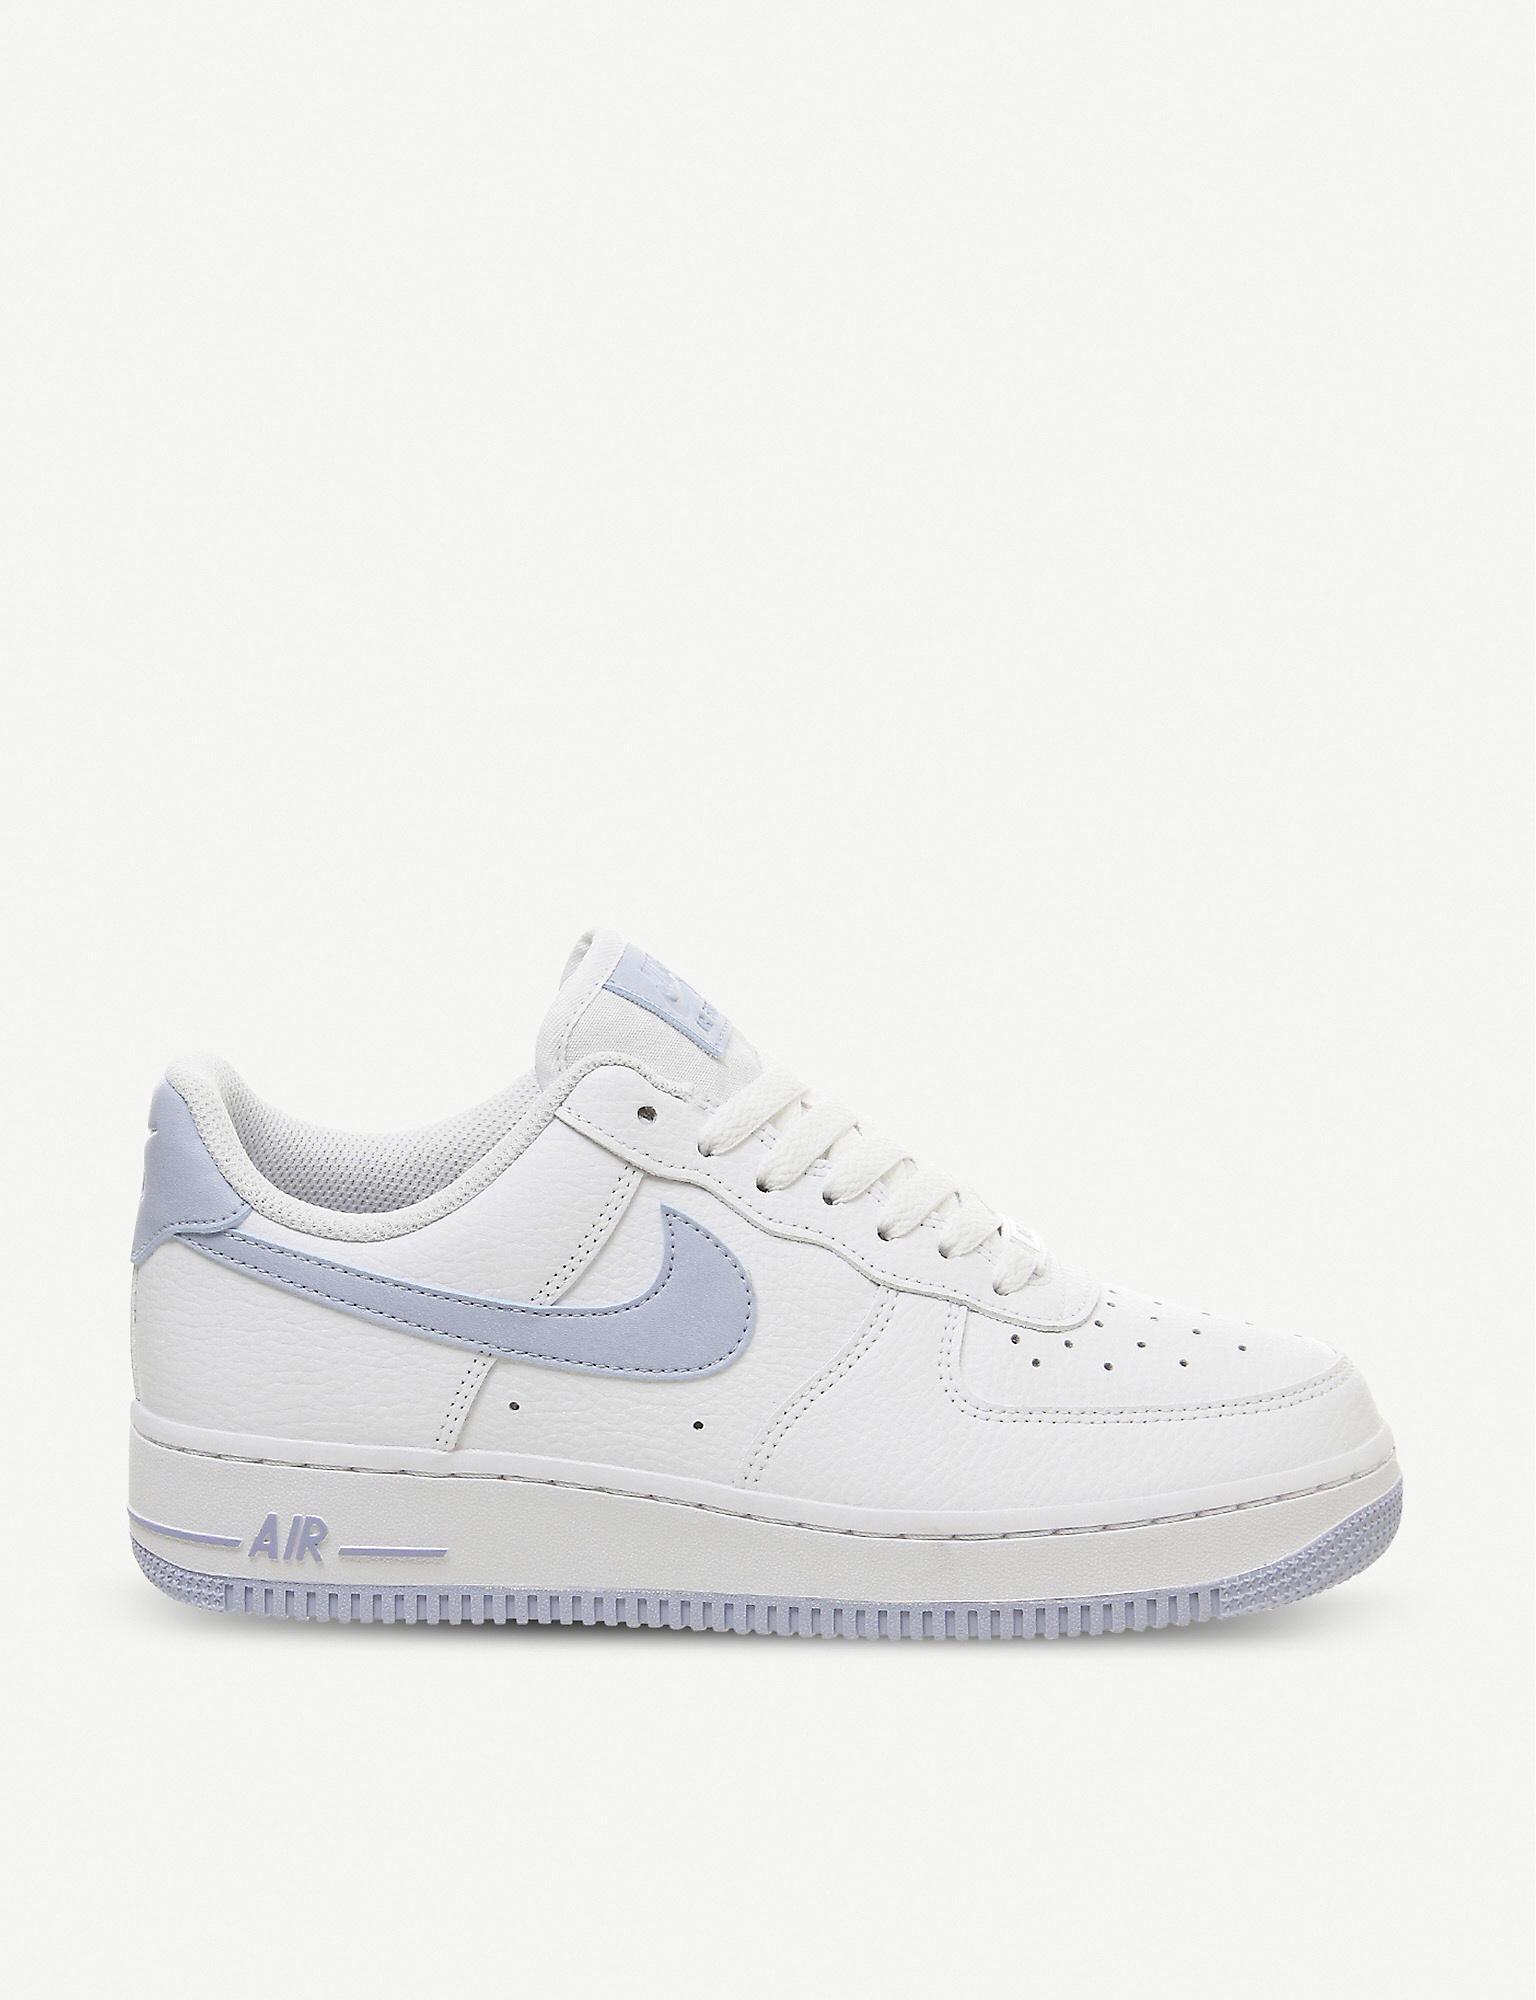 nike air force white and light blue